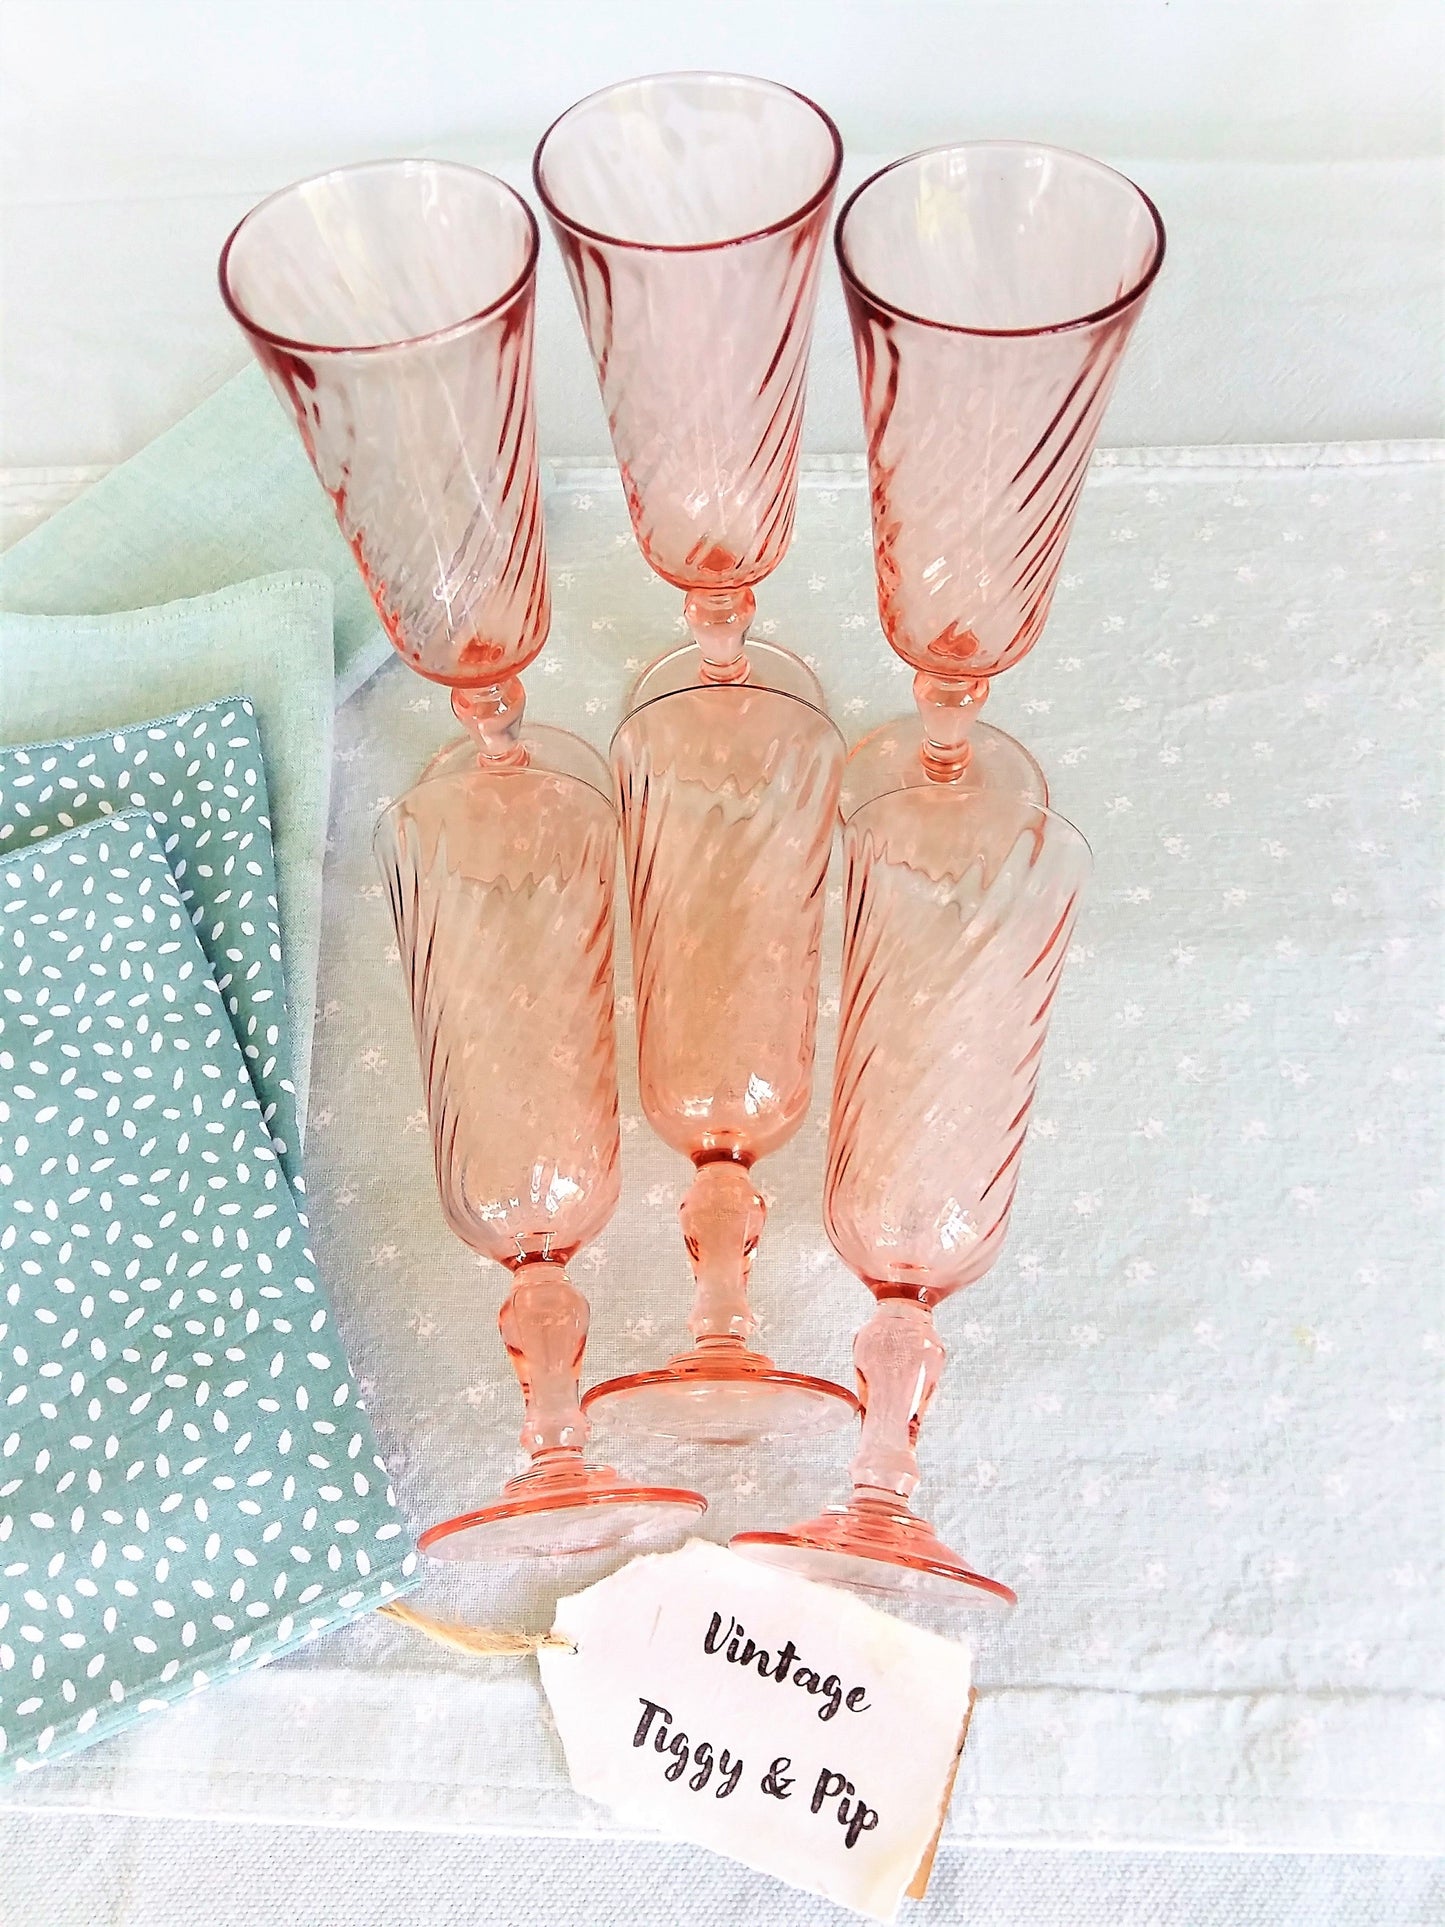 Six 1960s Vintage Pink Champagne Flutes. from Tiggy & Pip - €120.00! Shop now at Tiggy and Pip